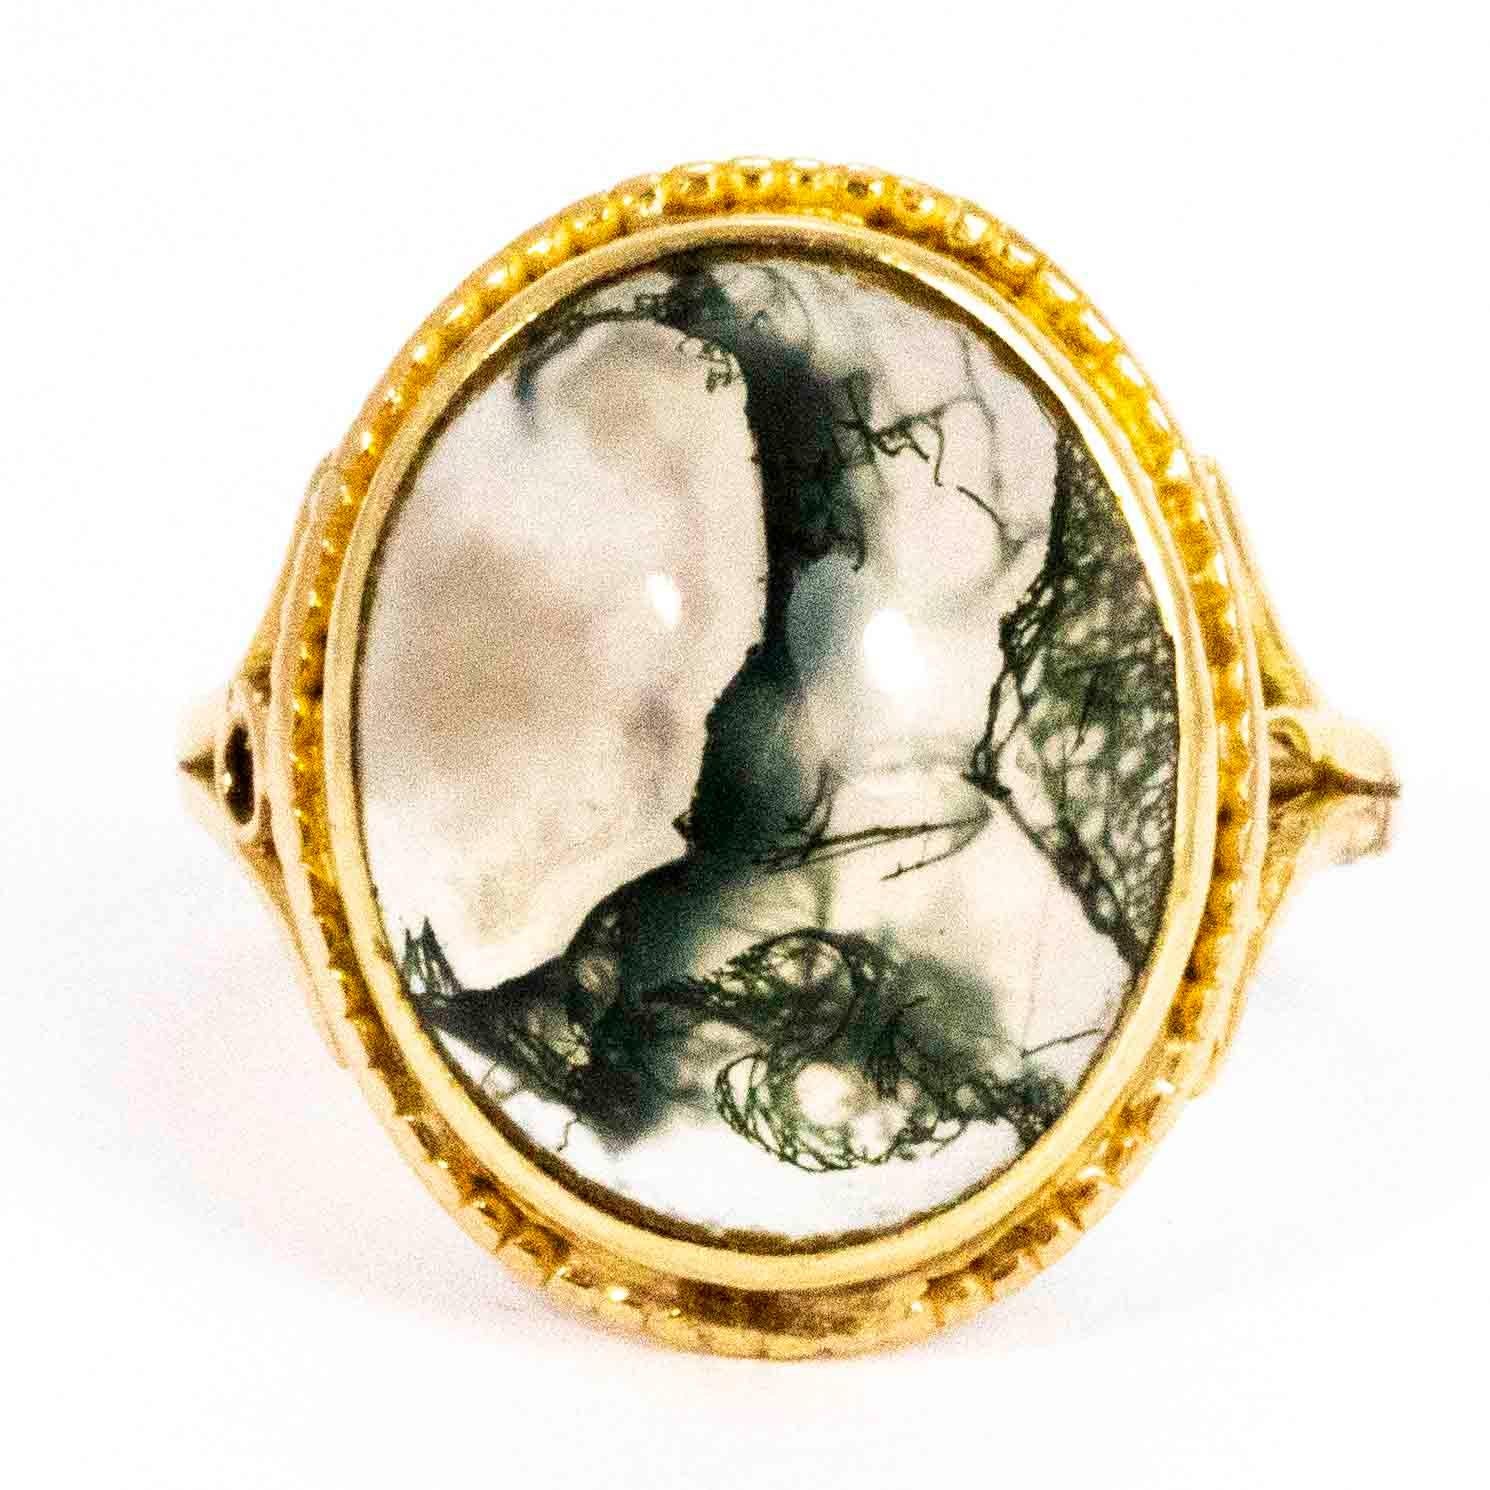 A beautiful vintage ring set with a large cabochon cut moss agate. The agate has wonderful intricate colouring which changes from every angle. The stone is surrounded by a superb scalloped border and set between elegant slit shoulders. Modelled in 9